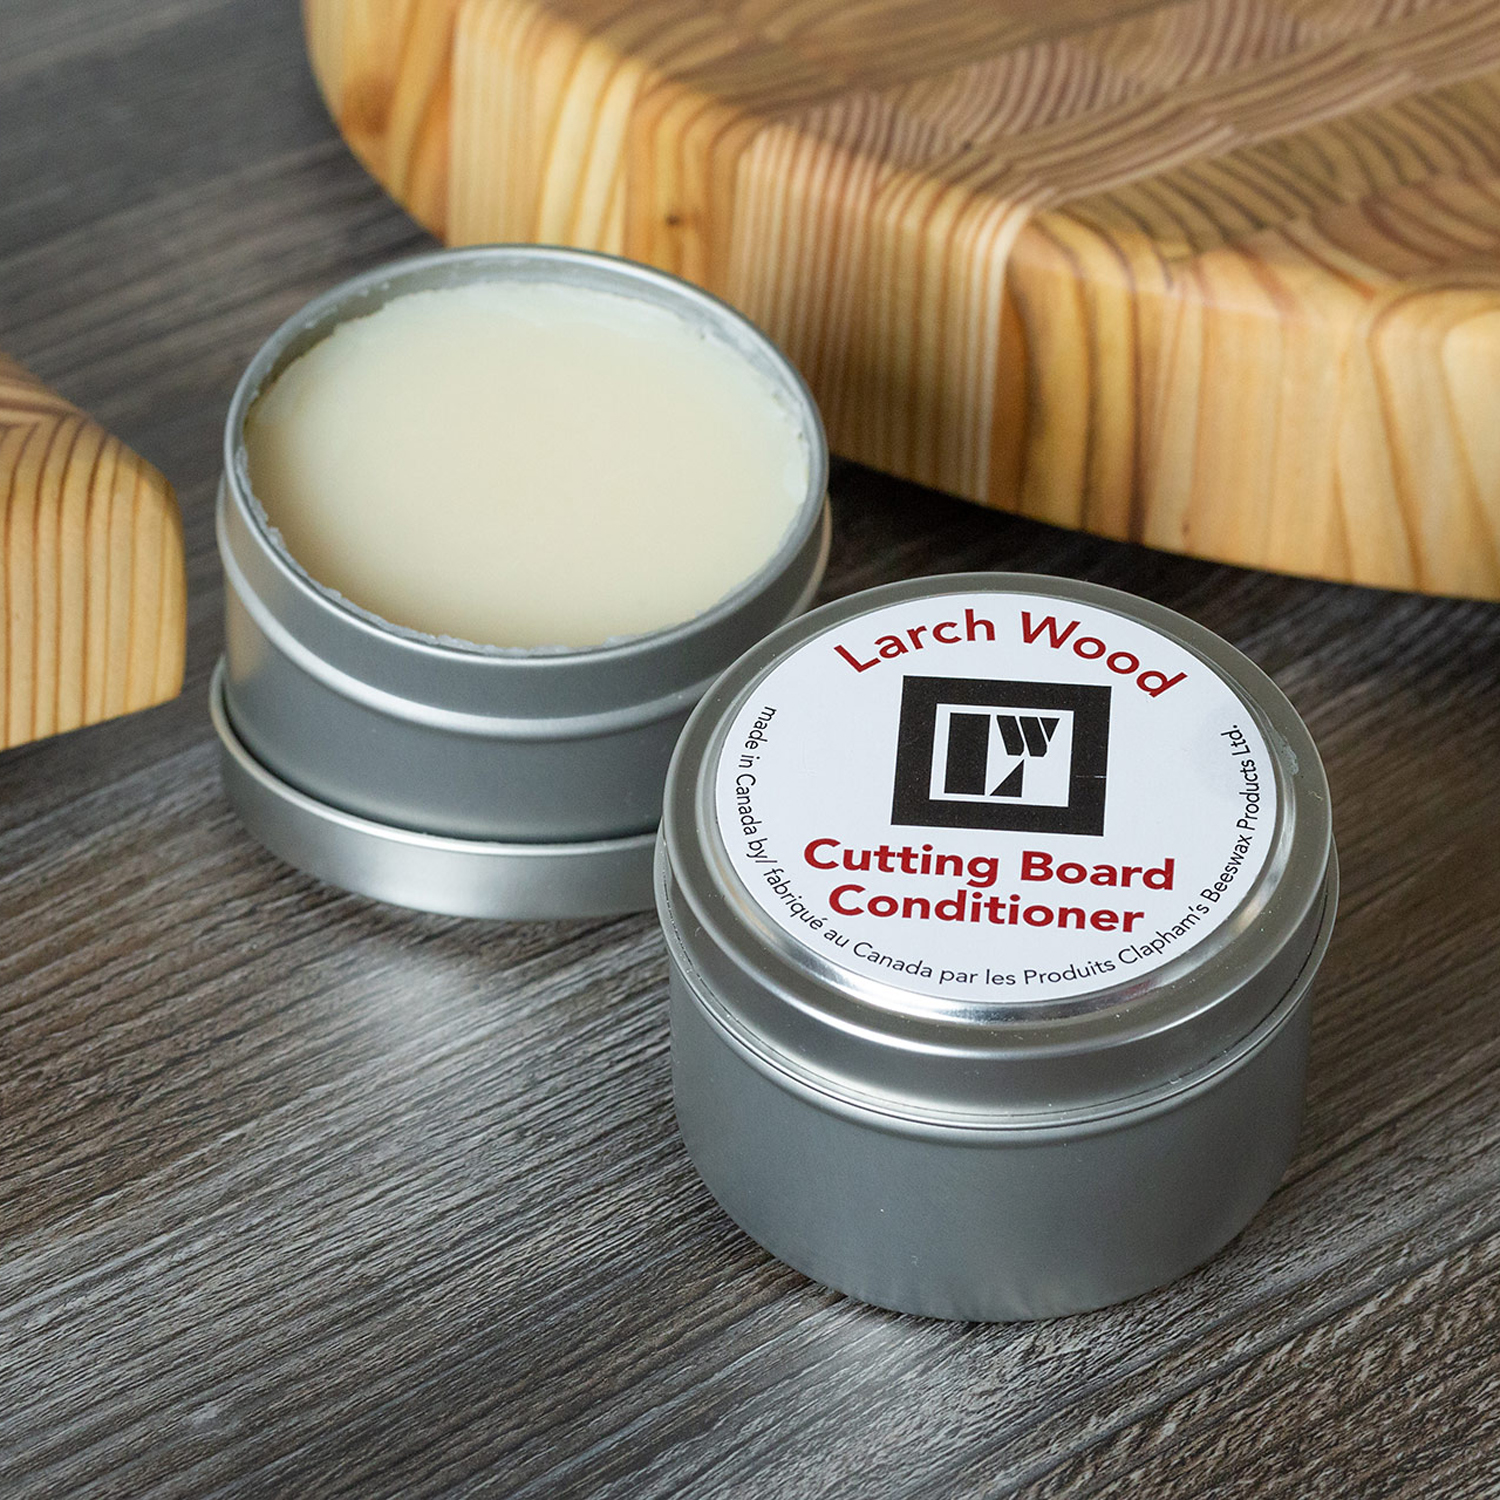 Larch Wood: Cutting Board Conditioner Product Image 2 of 3